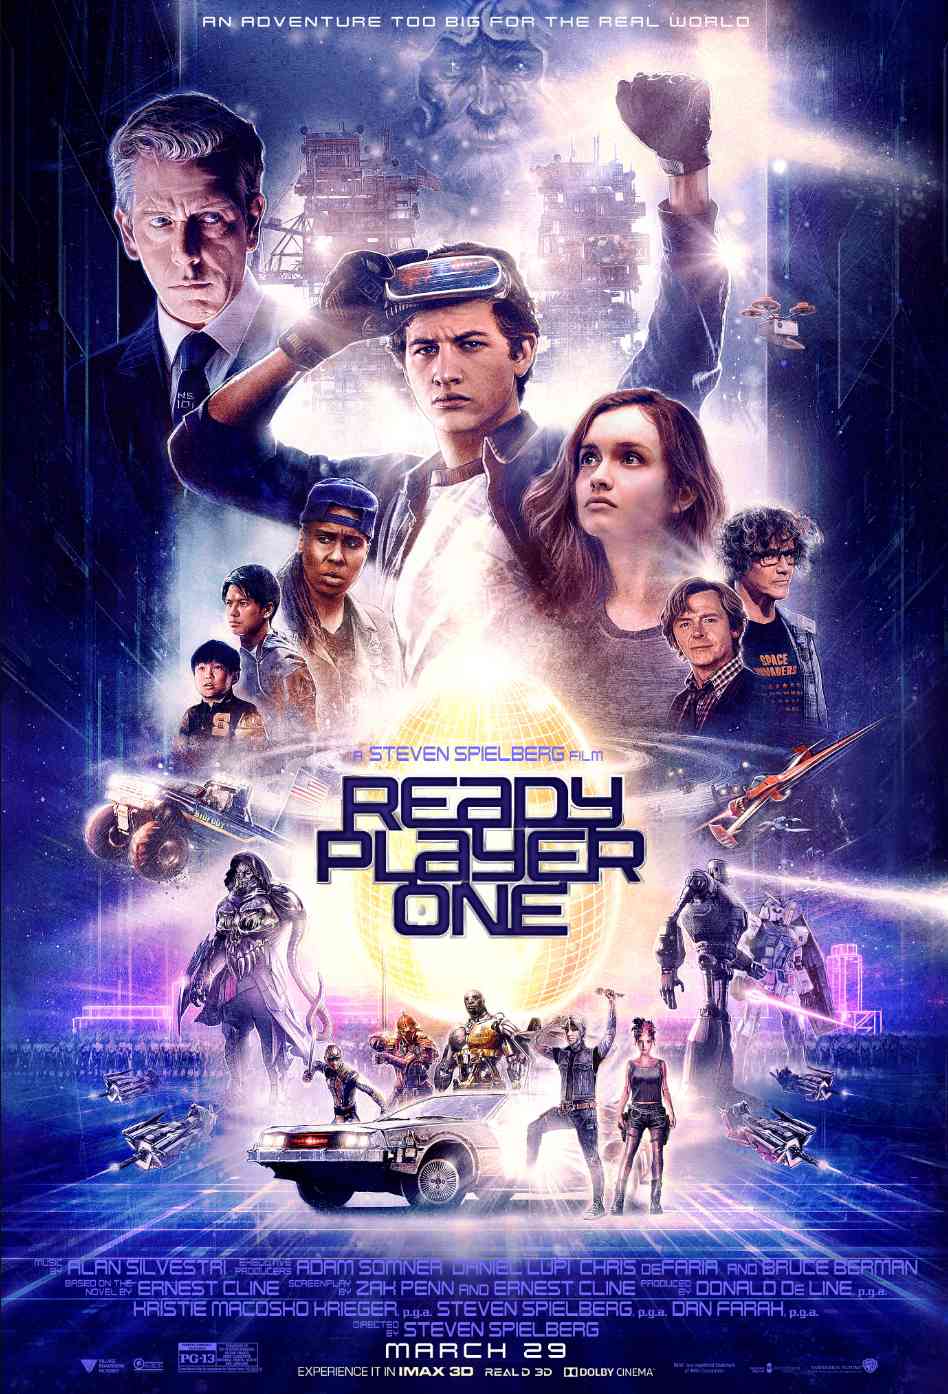 FULL MOVIE: Ready Player One (2018) [Action]